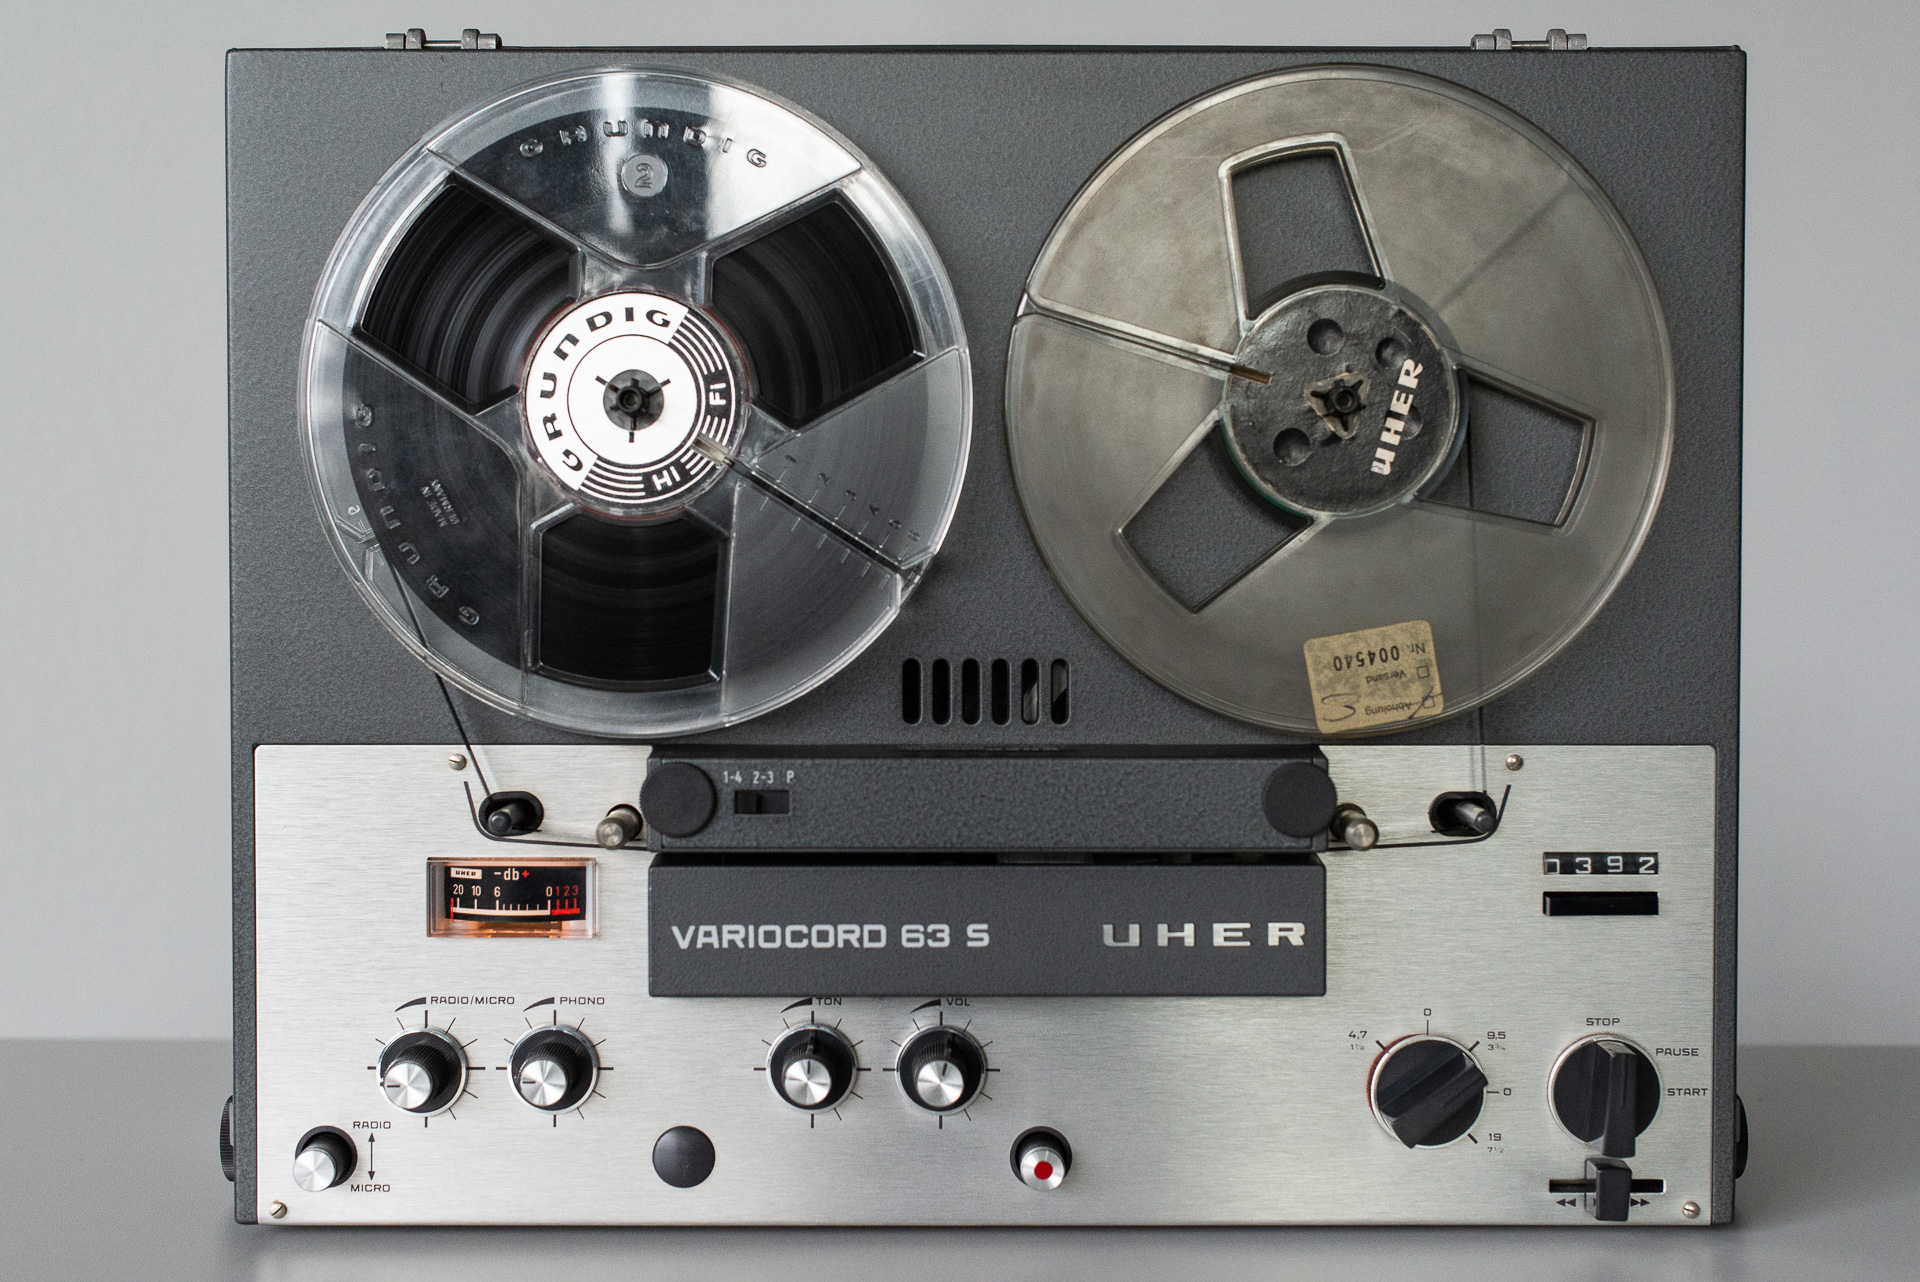 Reel to Reel Tape Recorder, University Library